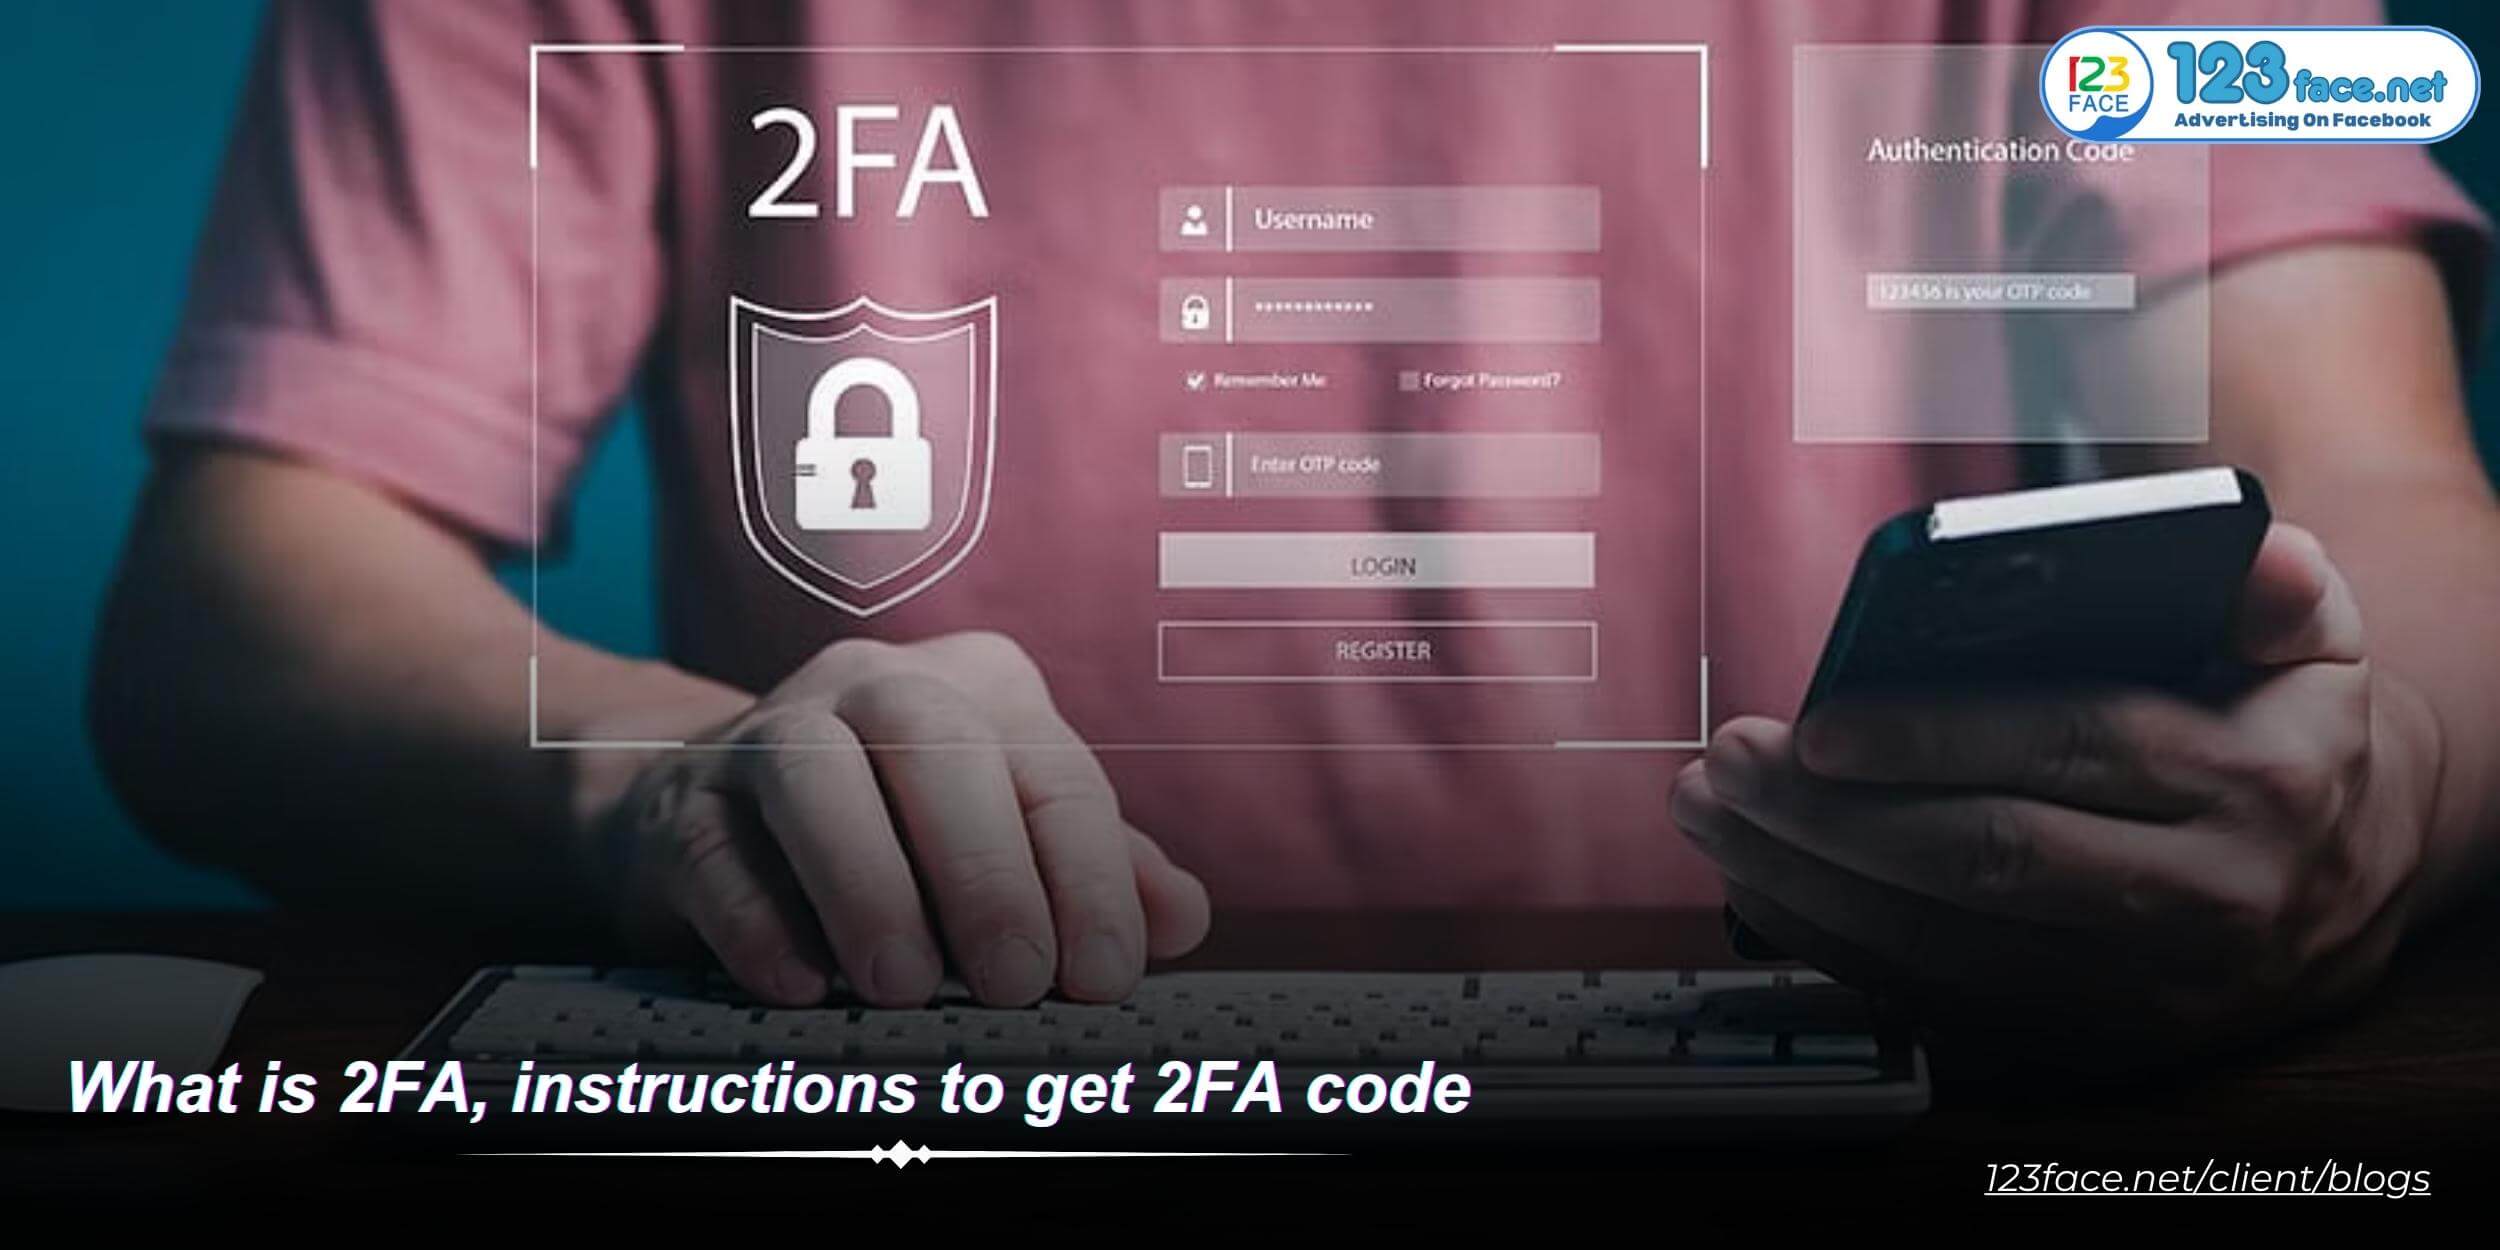 What is 2FA, instructions to get 2FA code